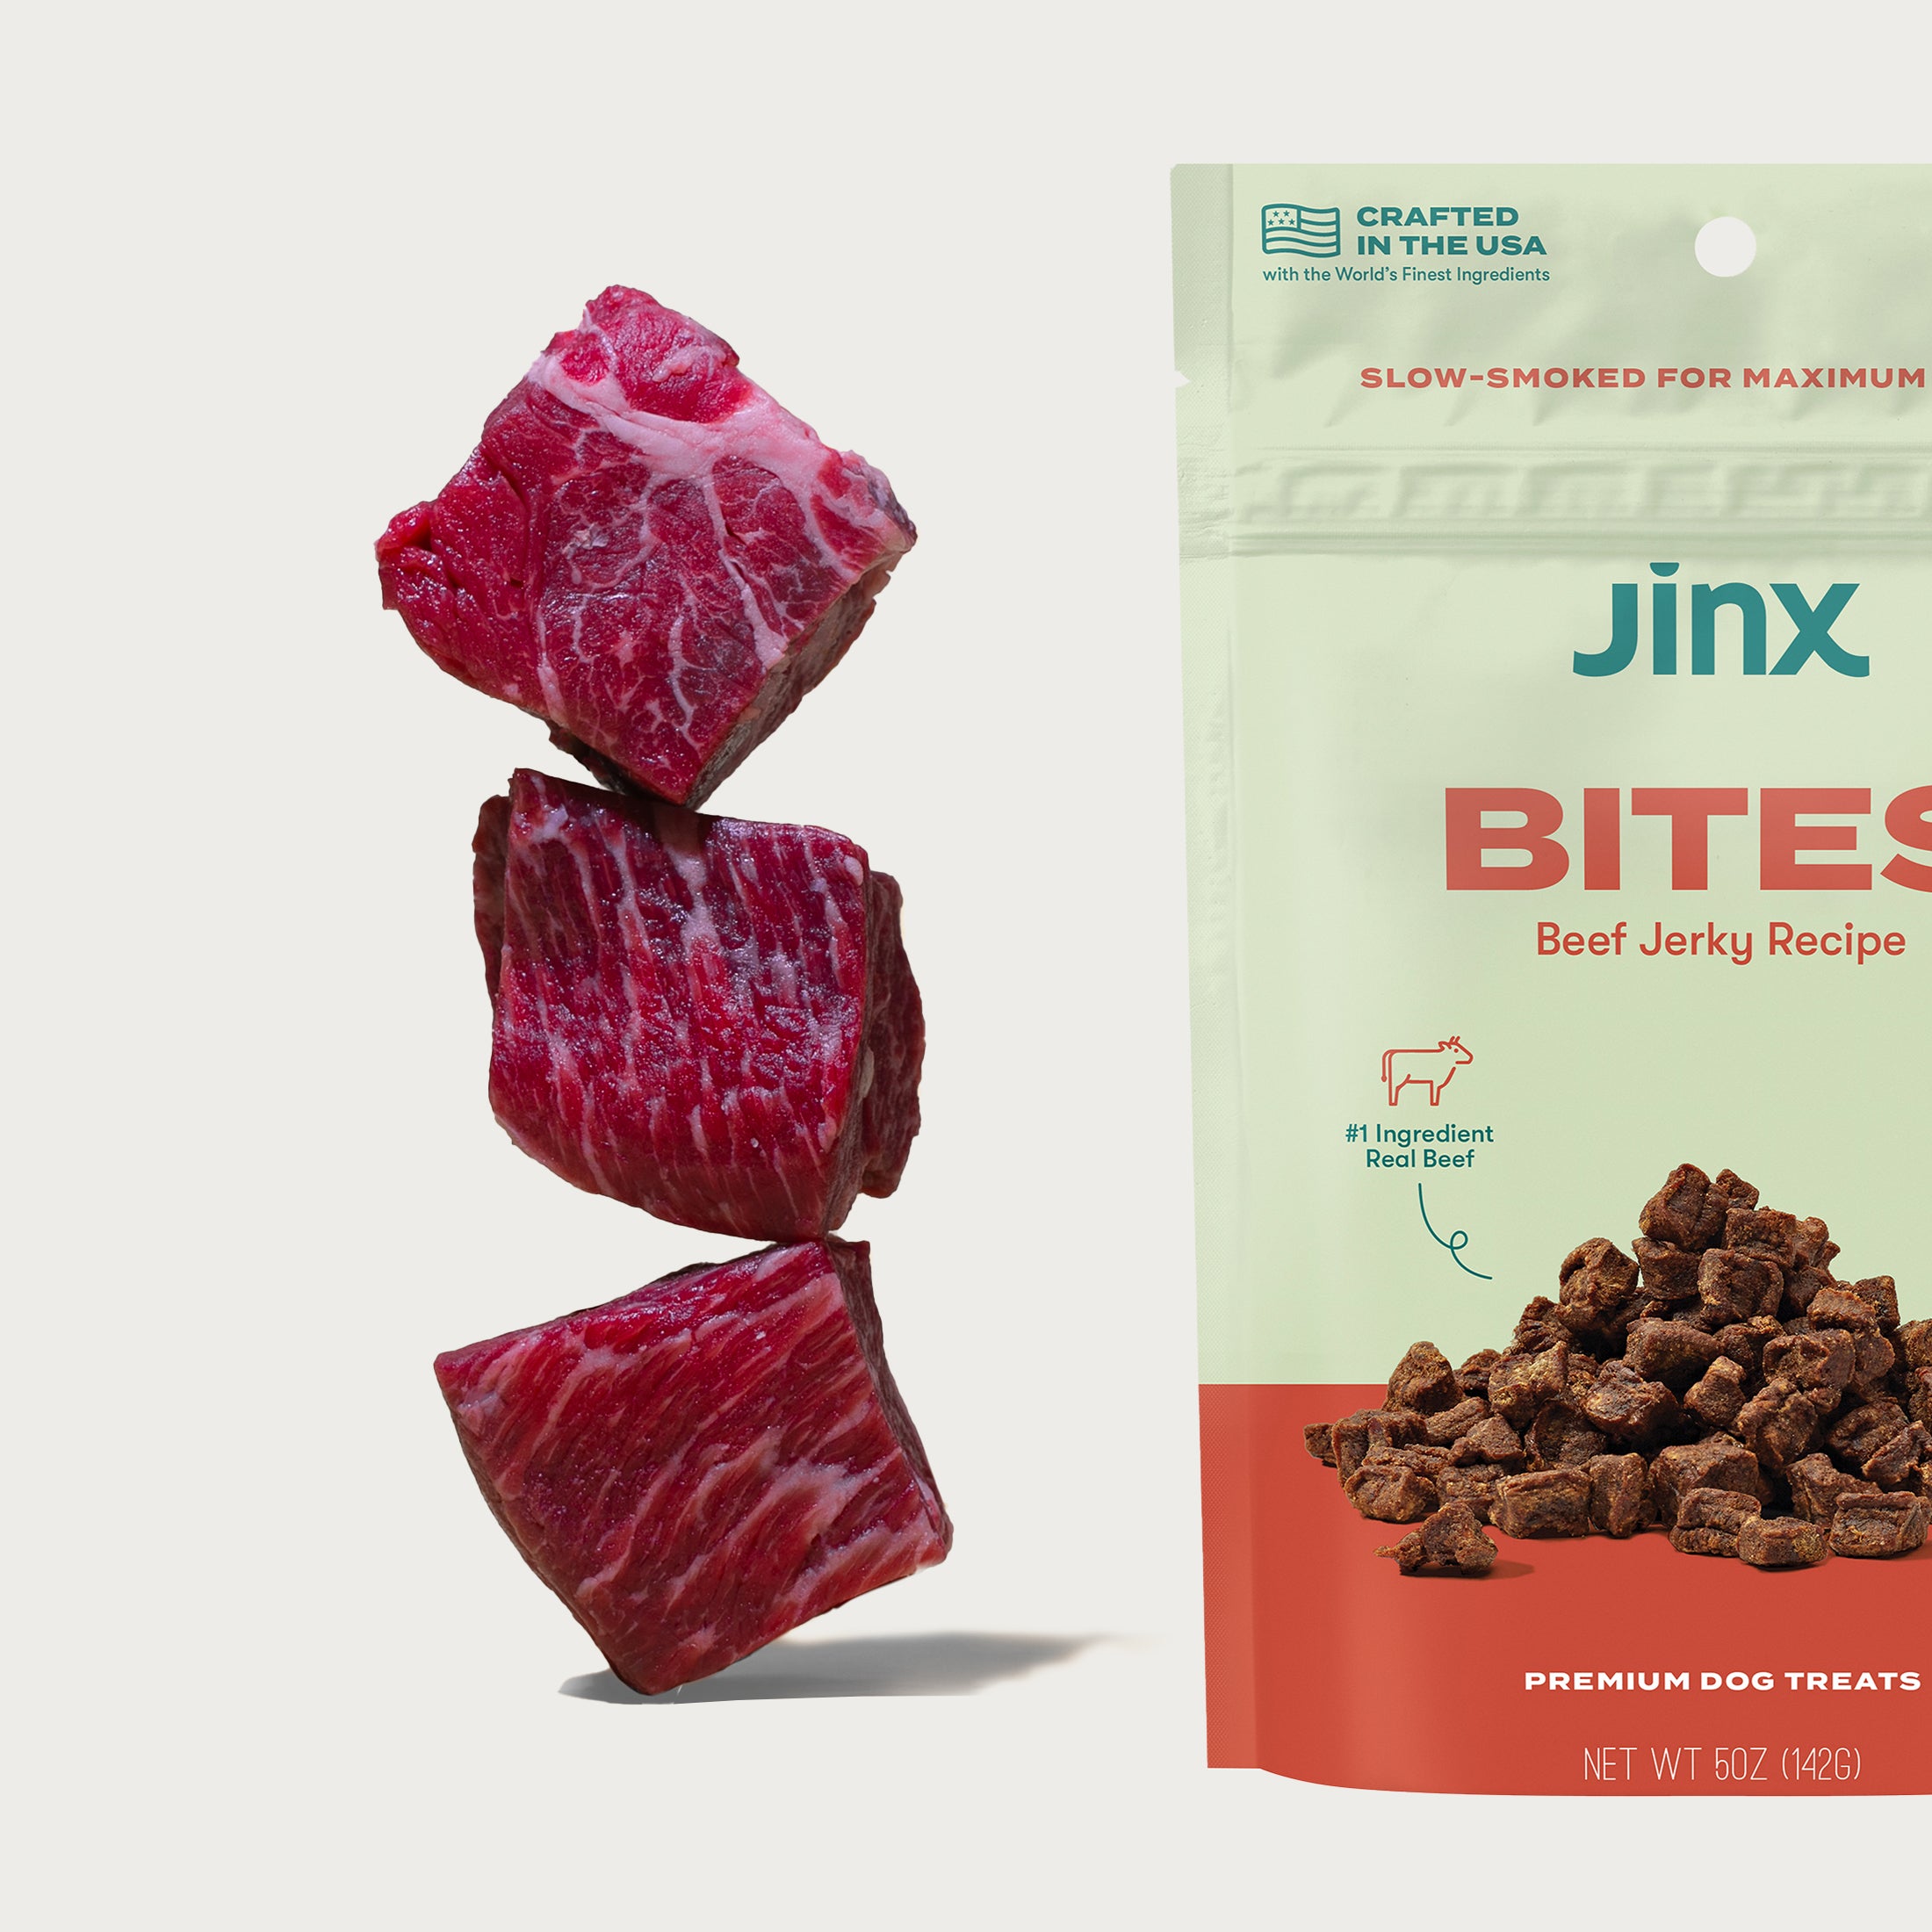 cubes of raw beef stacked on the left and image of jinx beef jerky bites packaging to the right